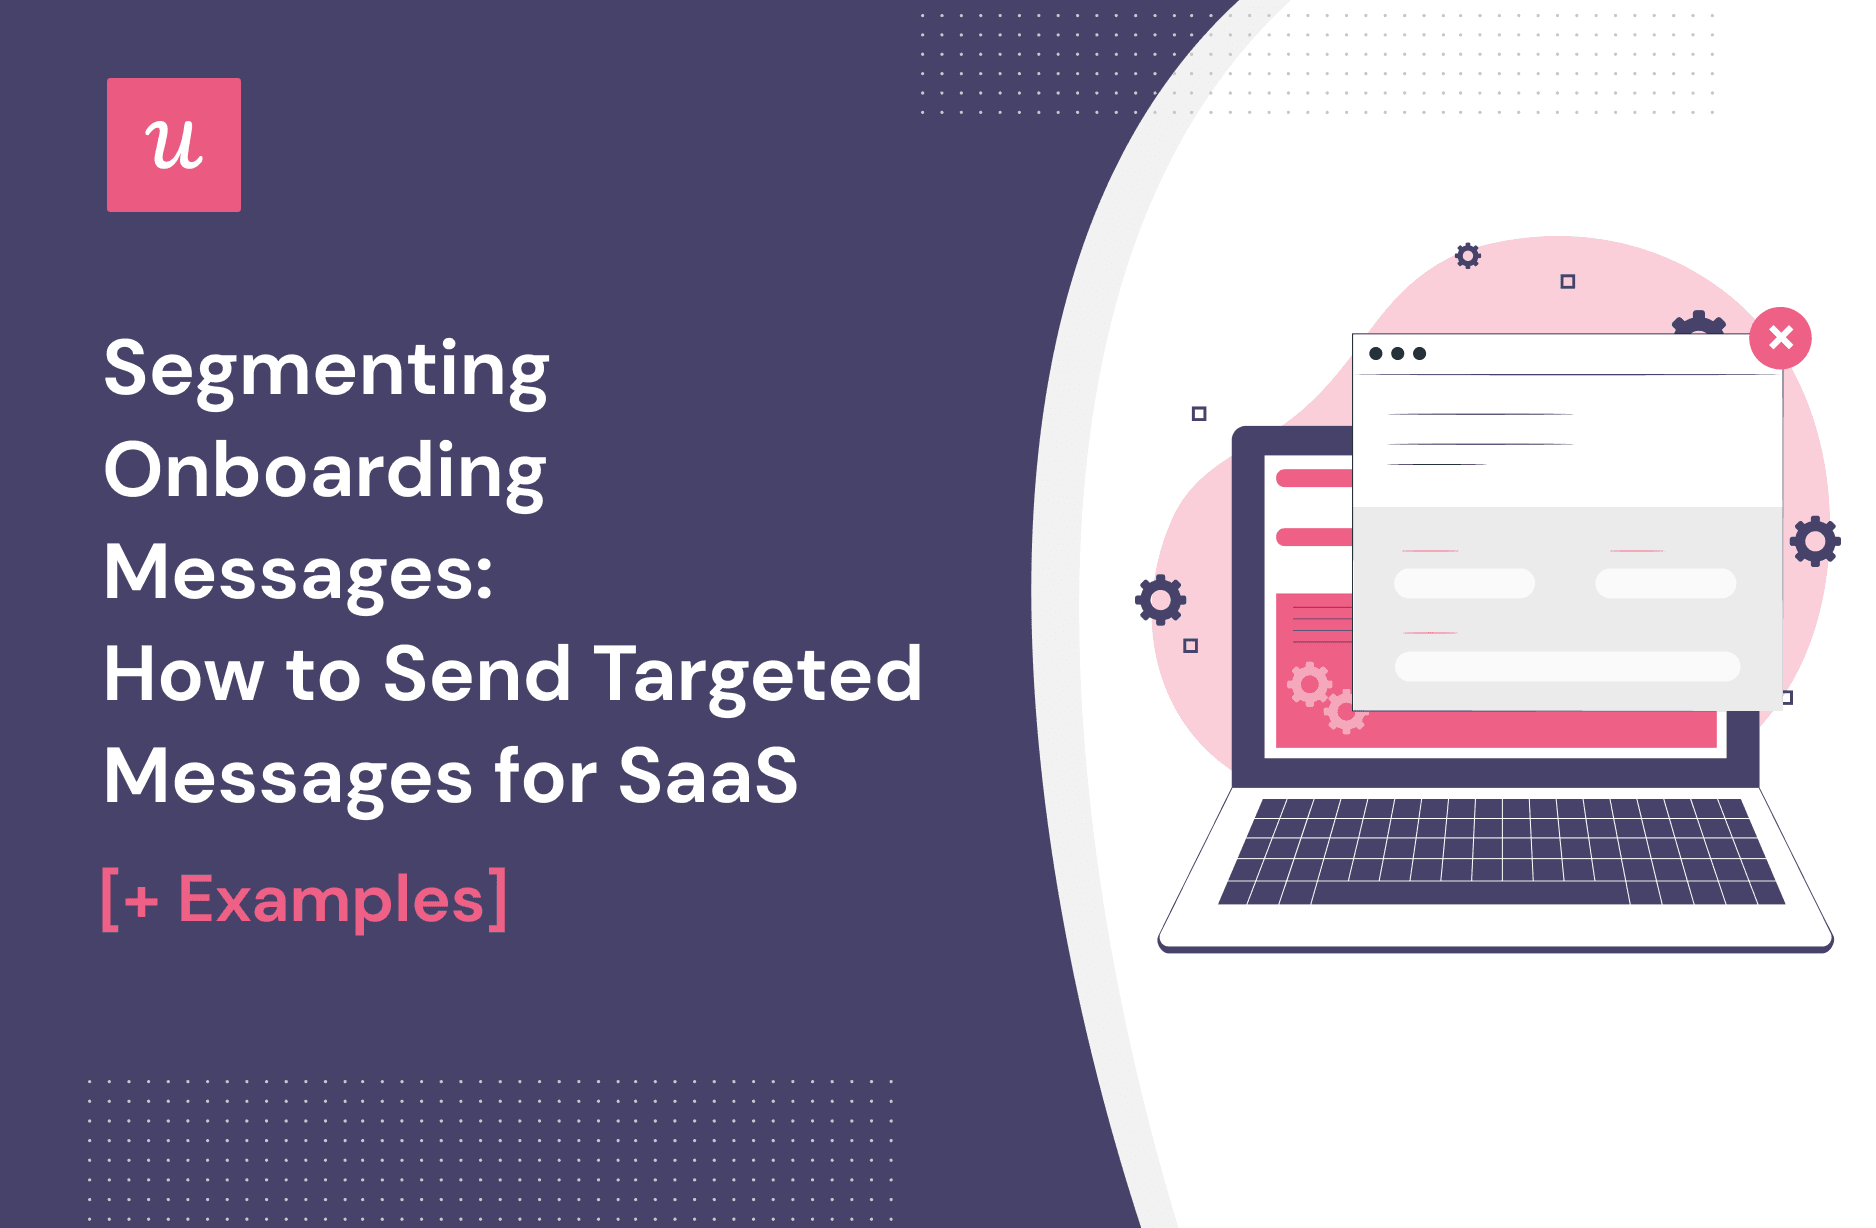 Segmenting Onboarding Messages: How to Send Targeted Messages for SaaS [+ Examples] cover